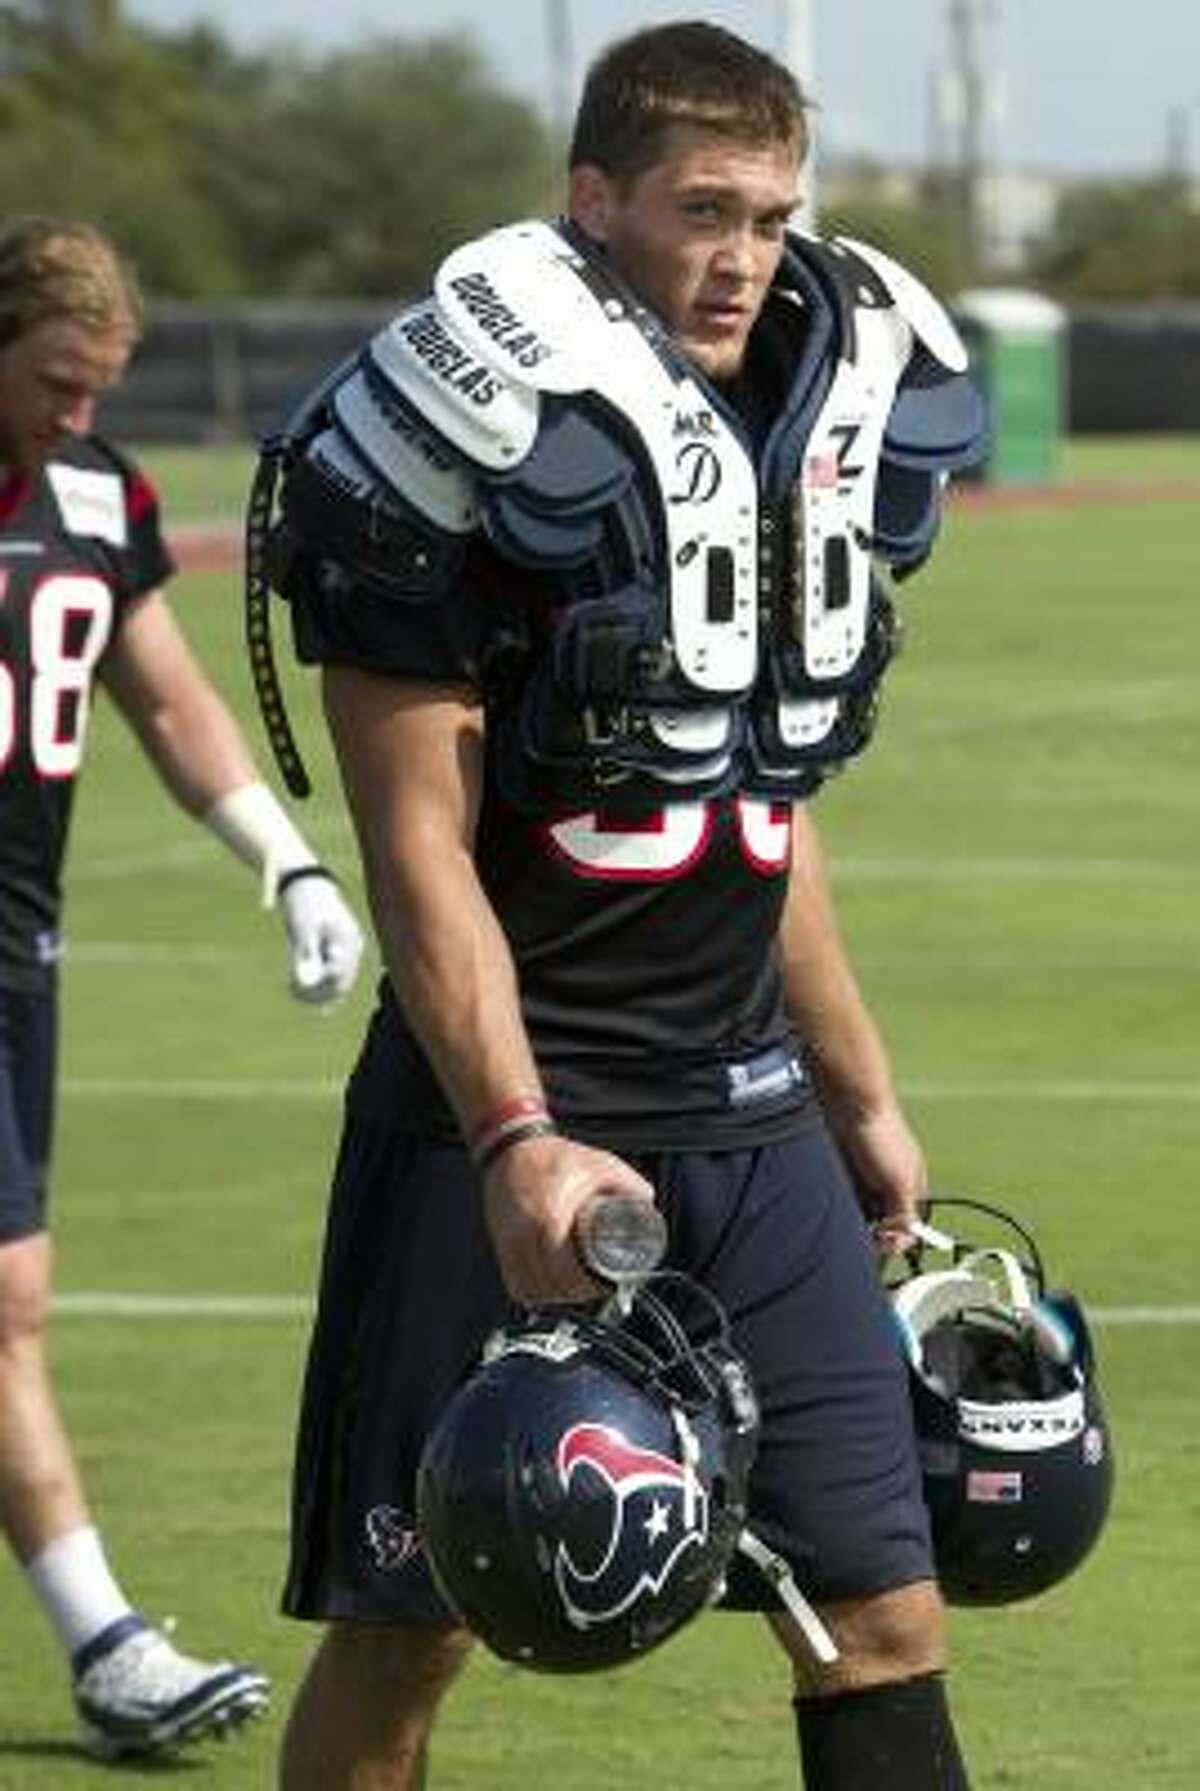 Texans linebacker Bryan Braman is an undrafted free agent out of West Texas A&M.